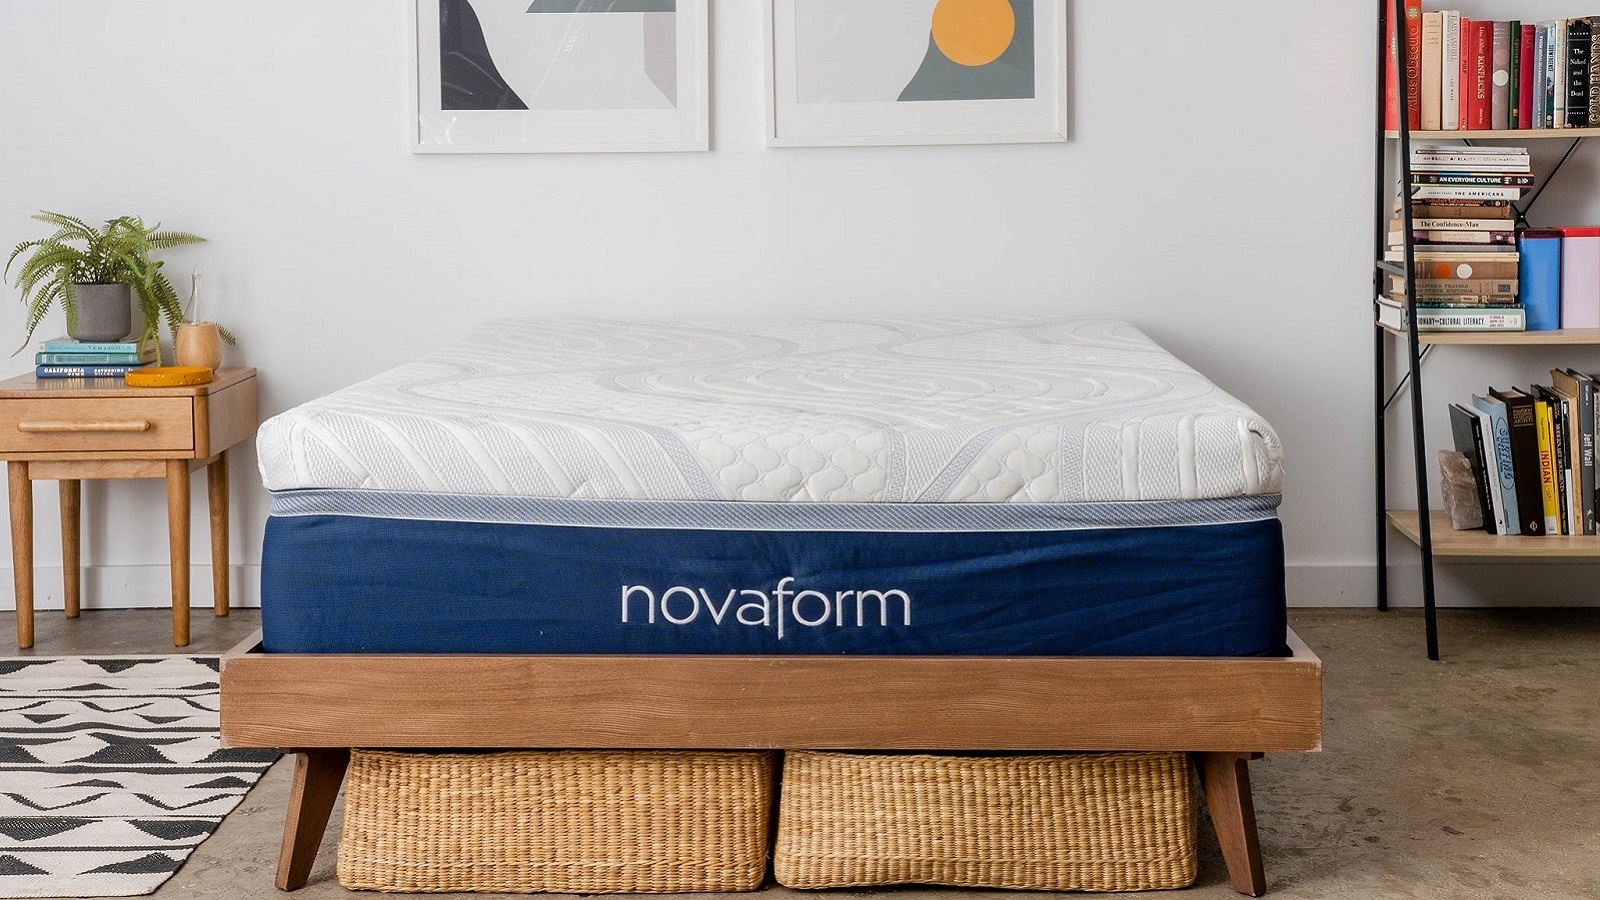 NovaForm Mattress Review: Would You Go For It?